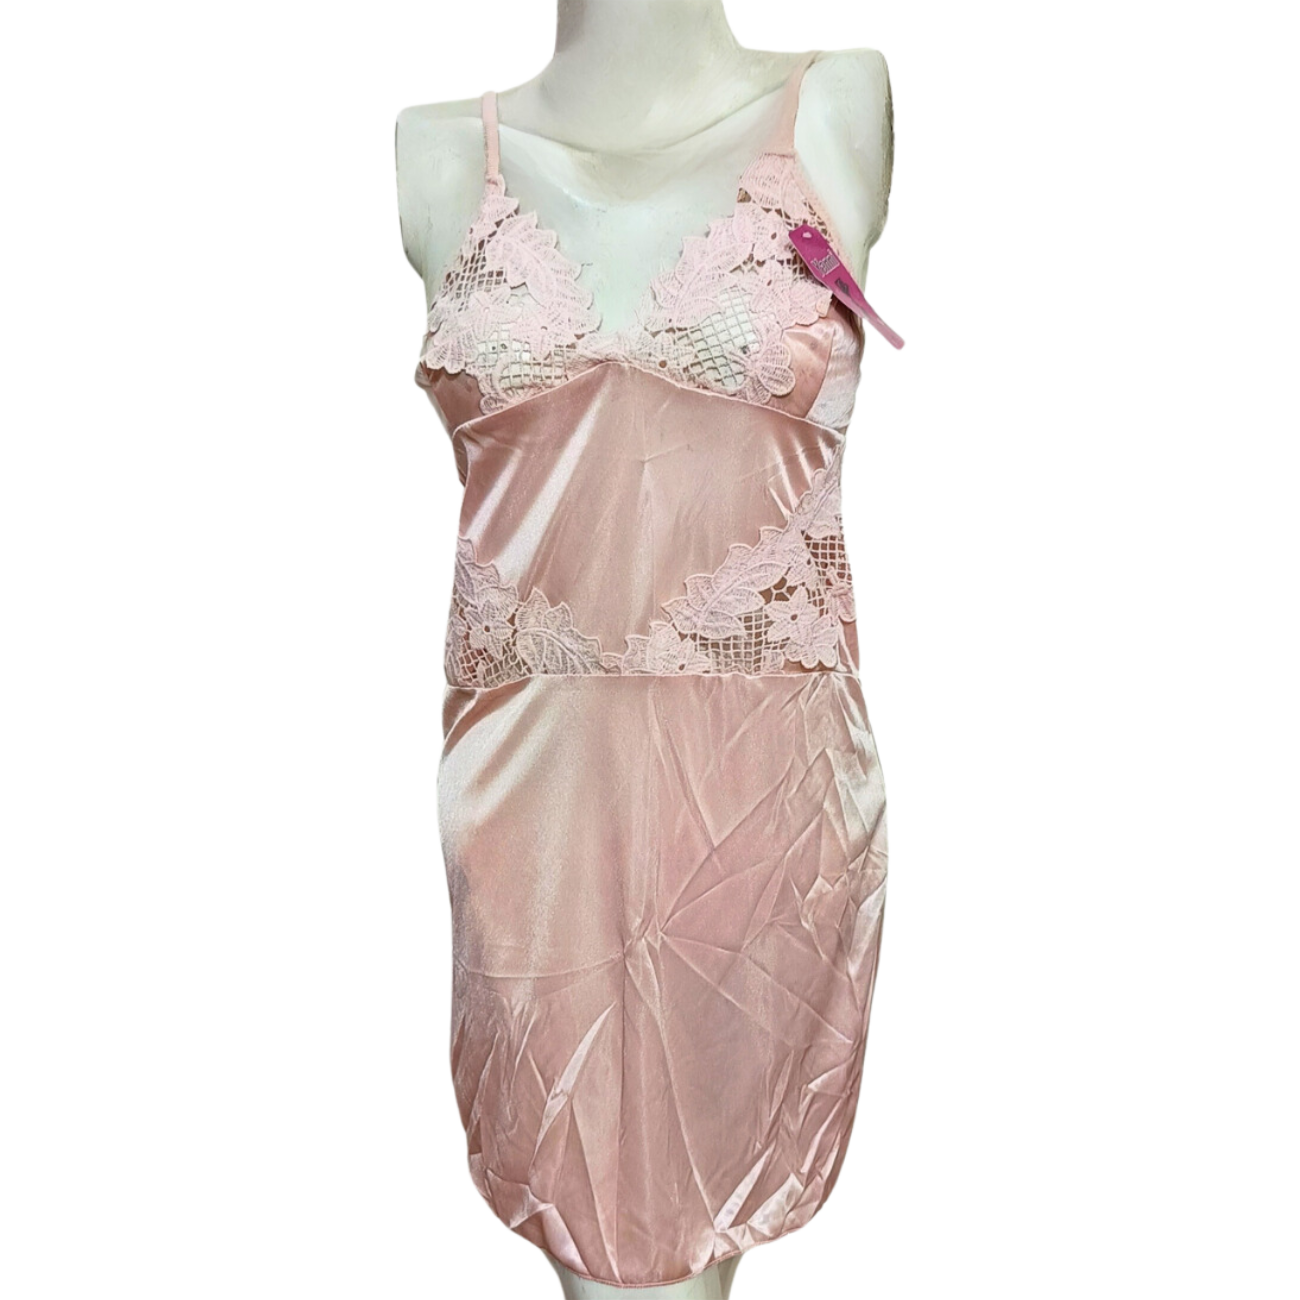 Ethereal Lace-Trimmed Satin Chemise - The Whispers Wear